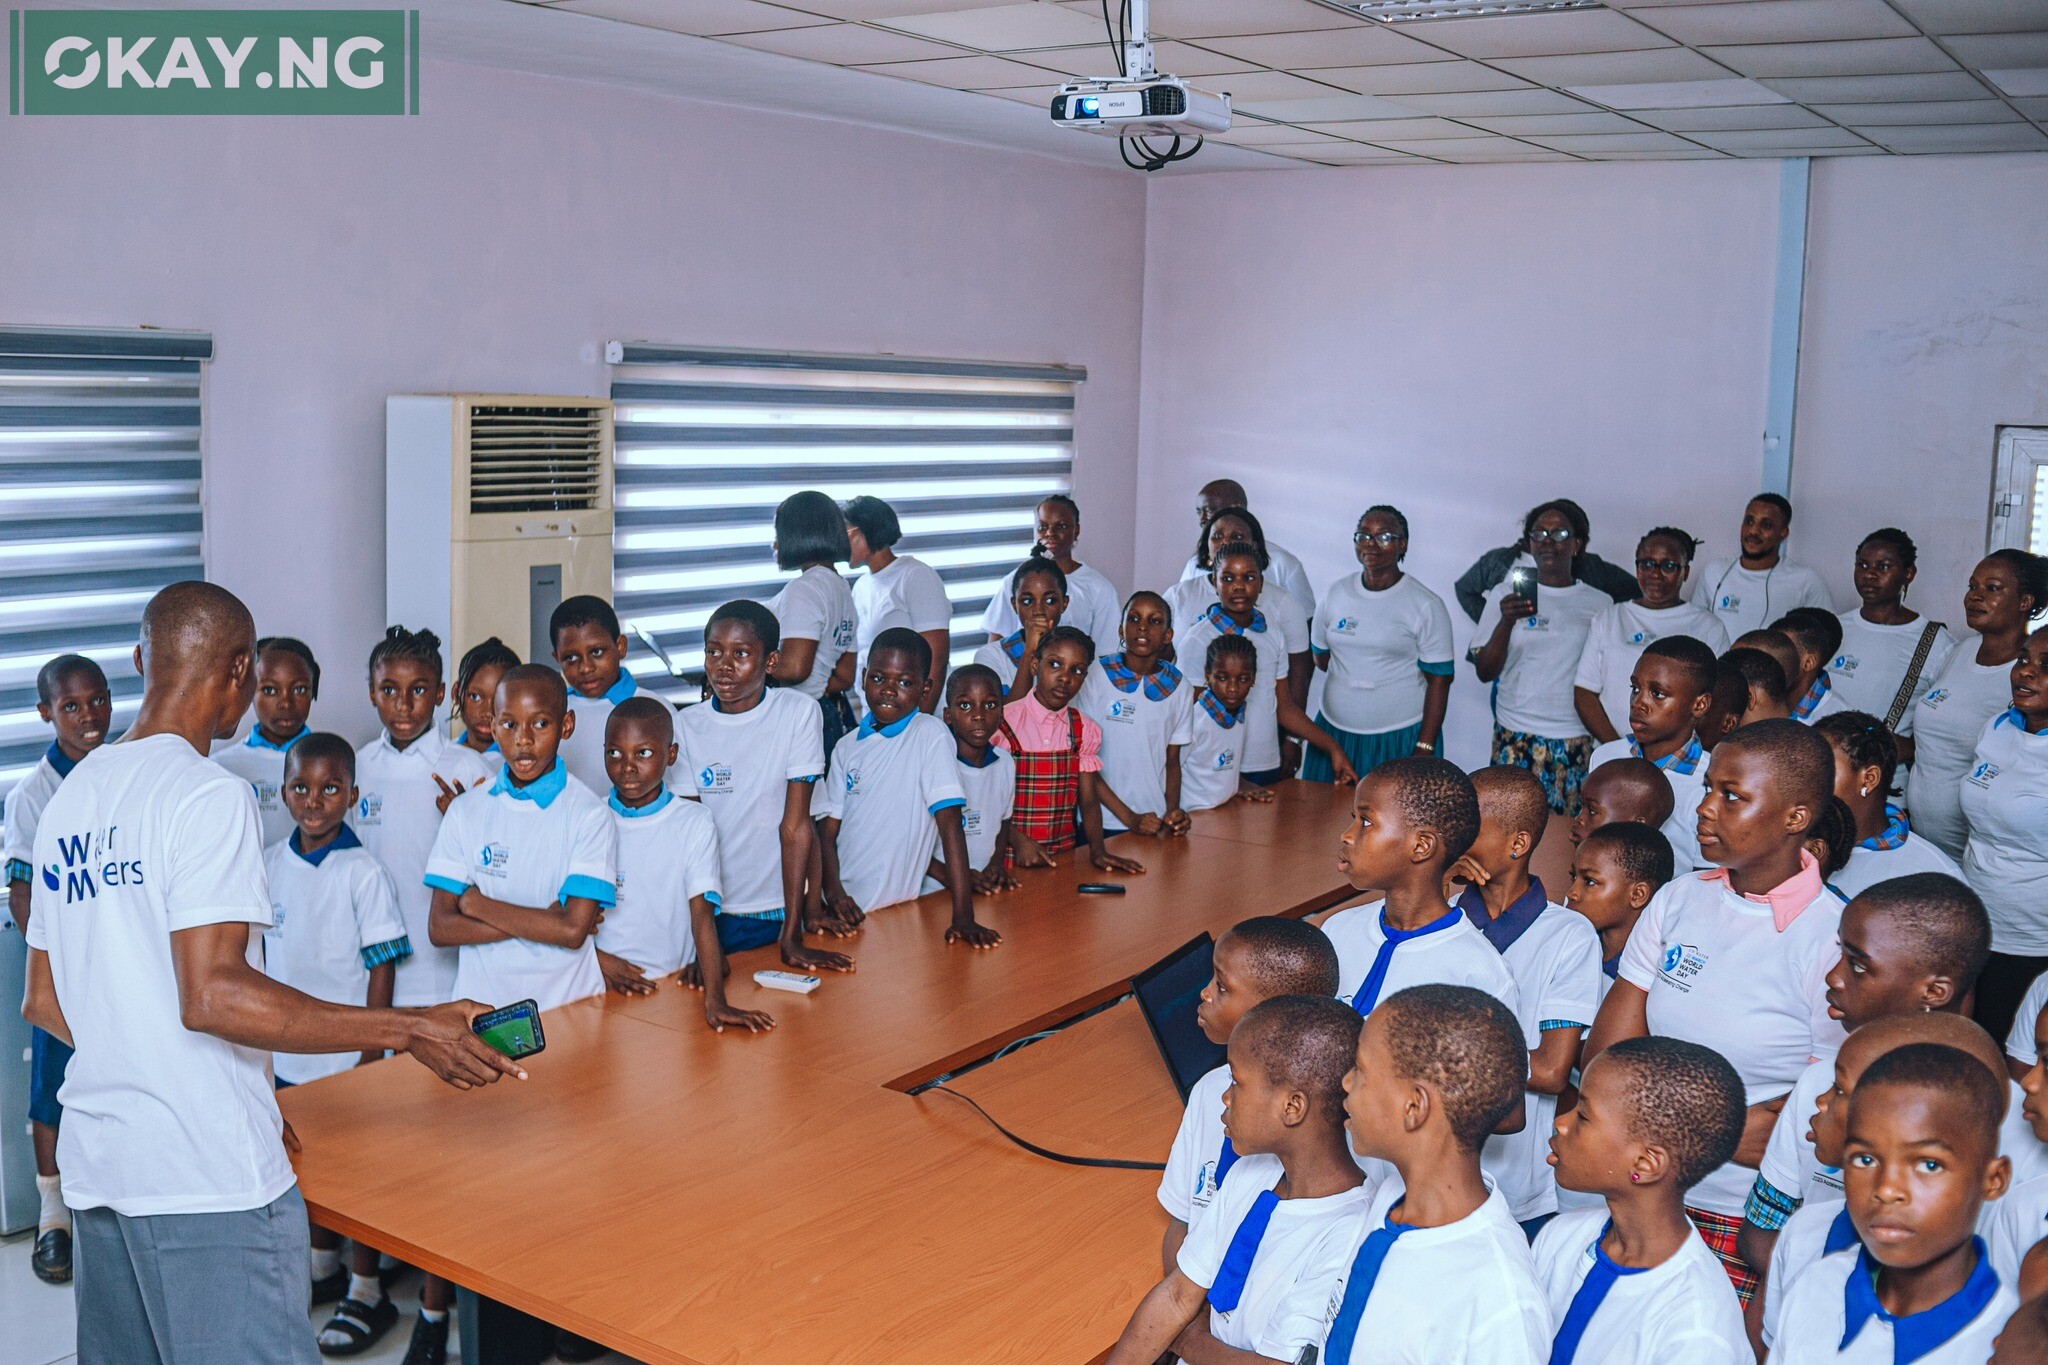 Cross section of participating children at both locations.